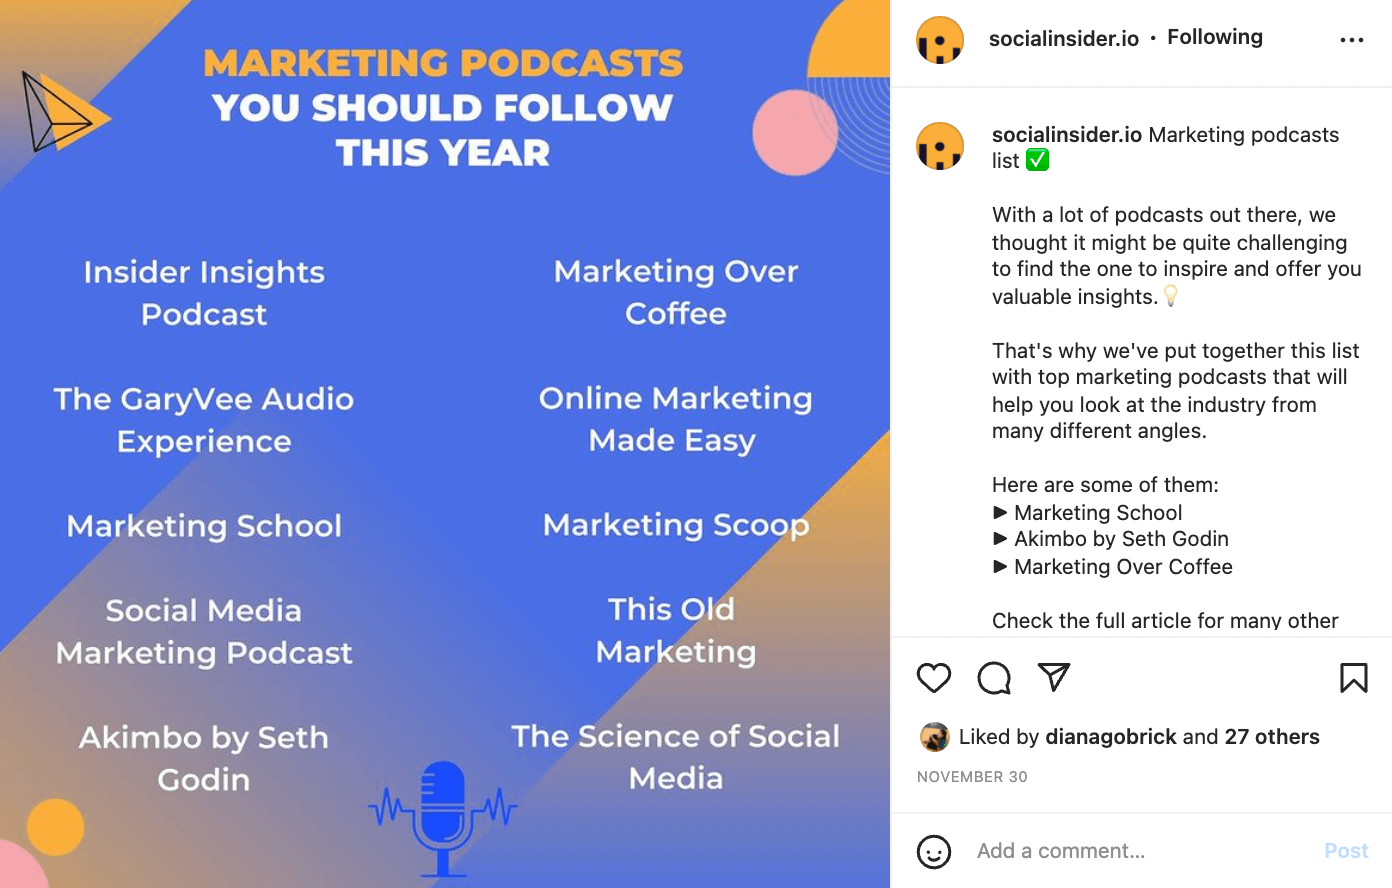 Here is an example of content repurposed on Instagram by Socialinsider.